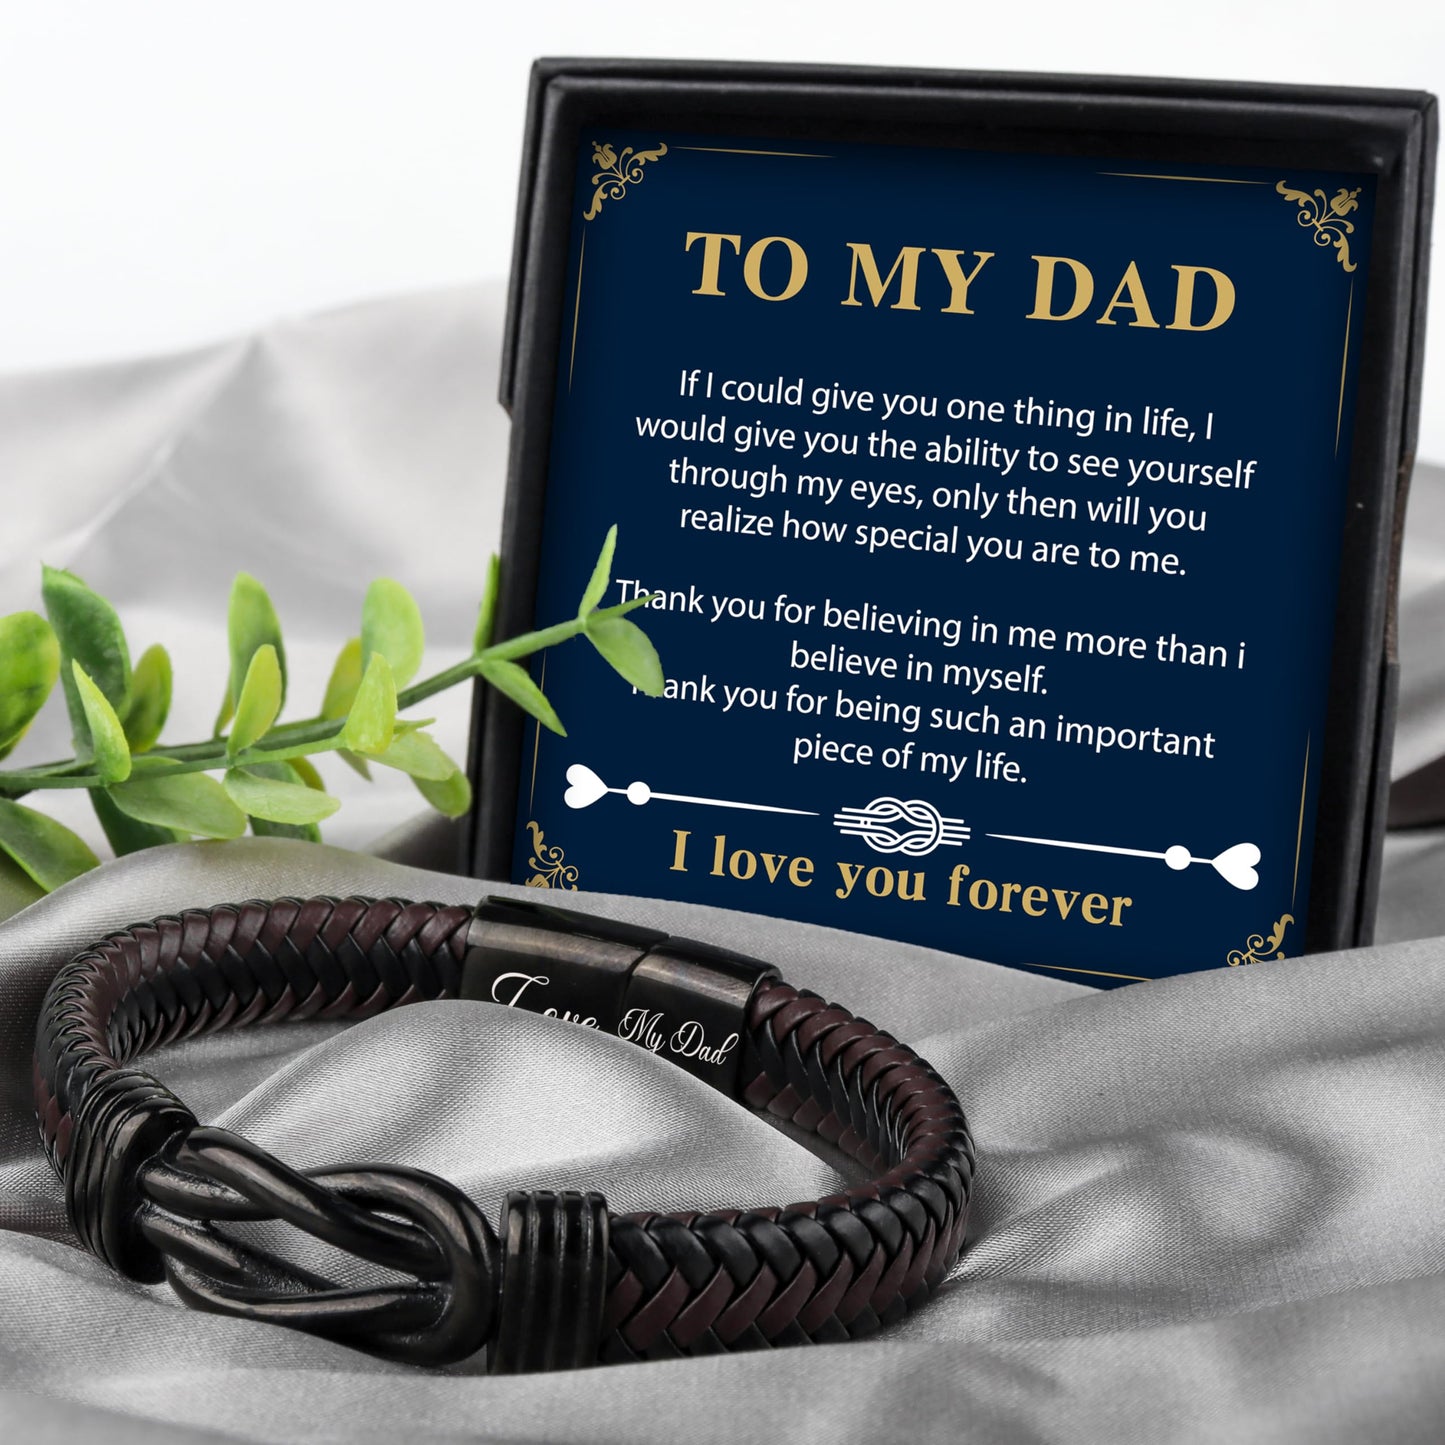 Shoppawhile Gifts for Dad Mens Leather Bracelet Dad Fathers Day Birthday Gifts from Daughter Son Unique Presents for Dad Christmas